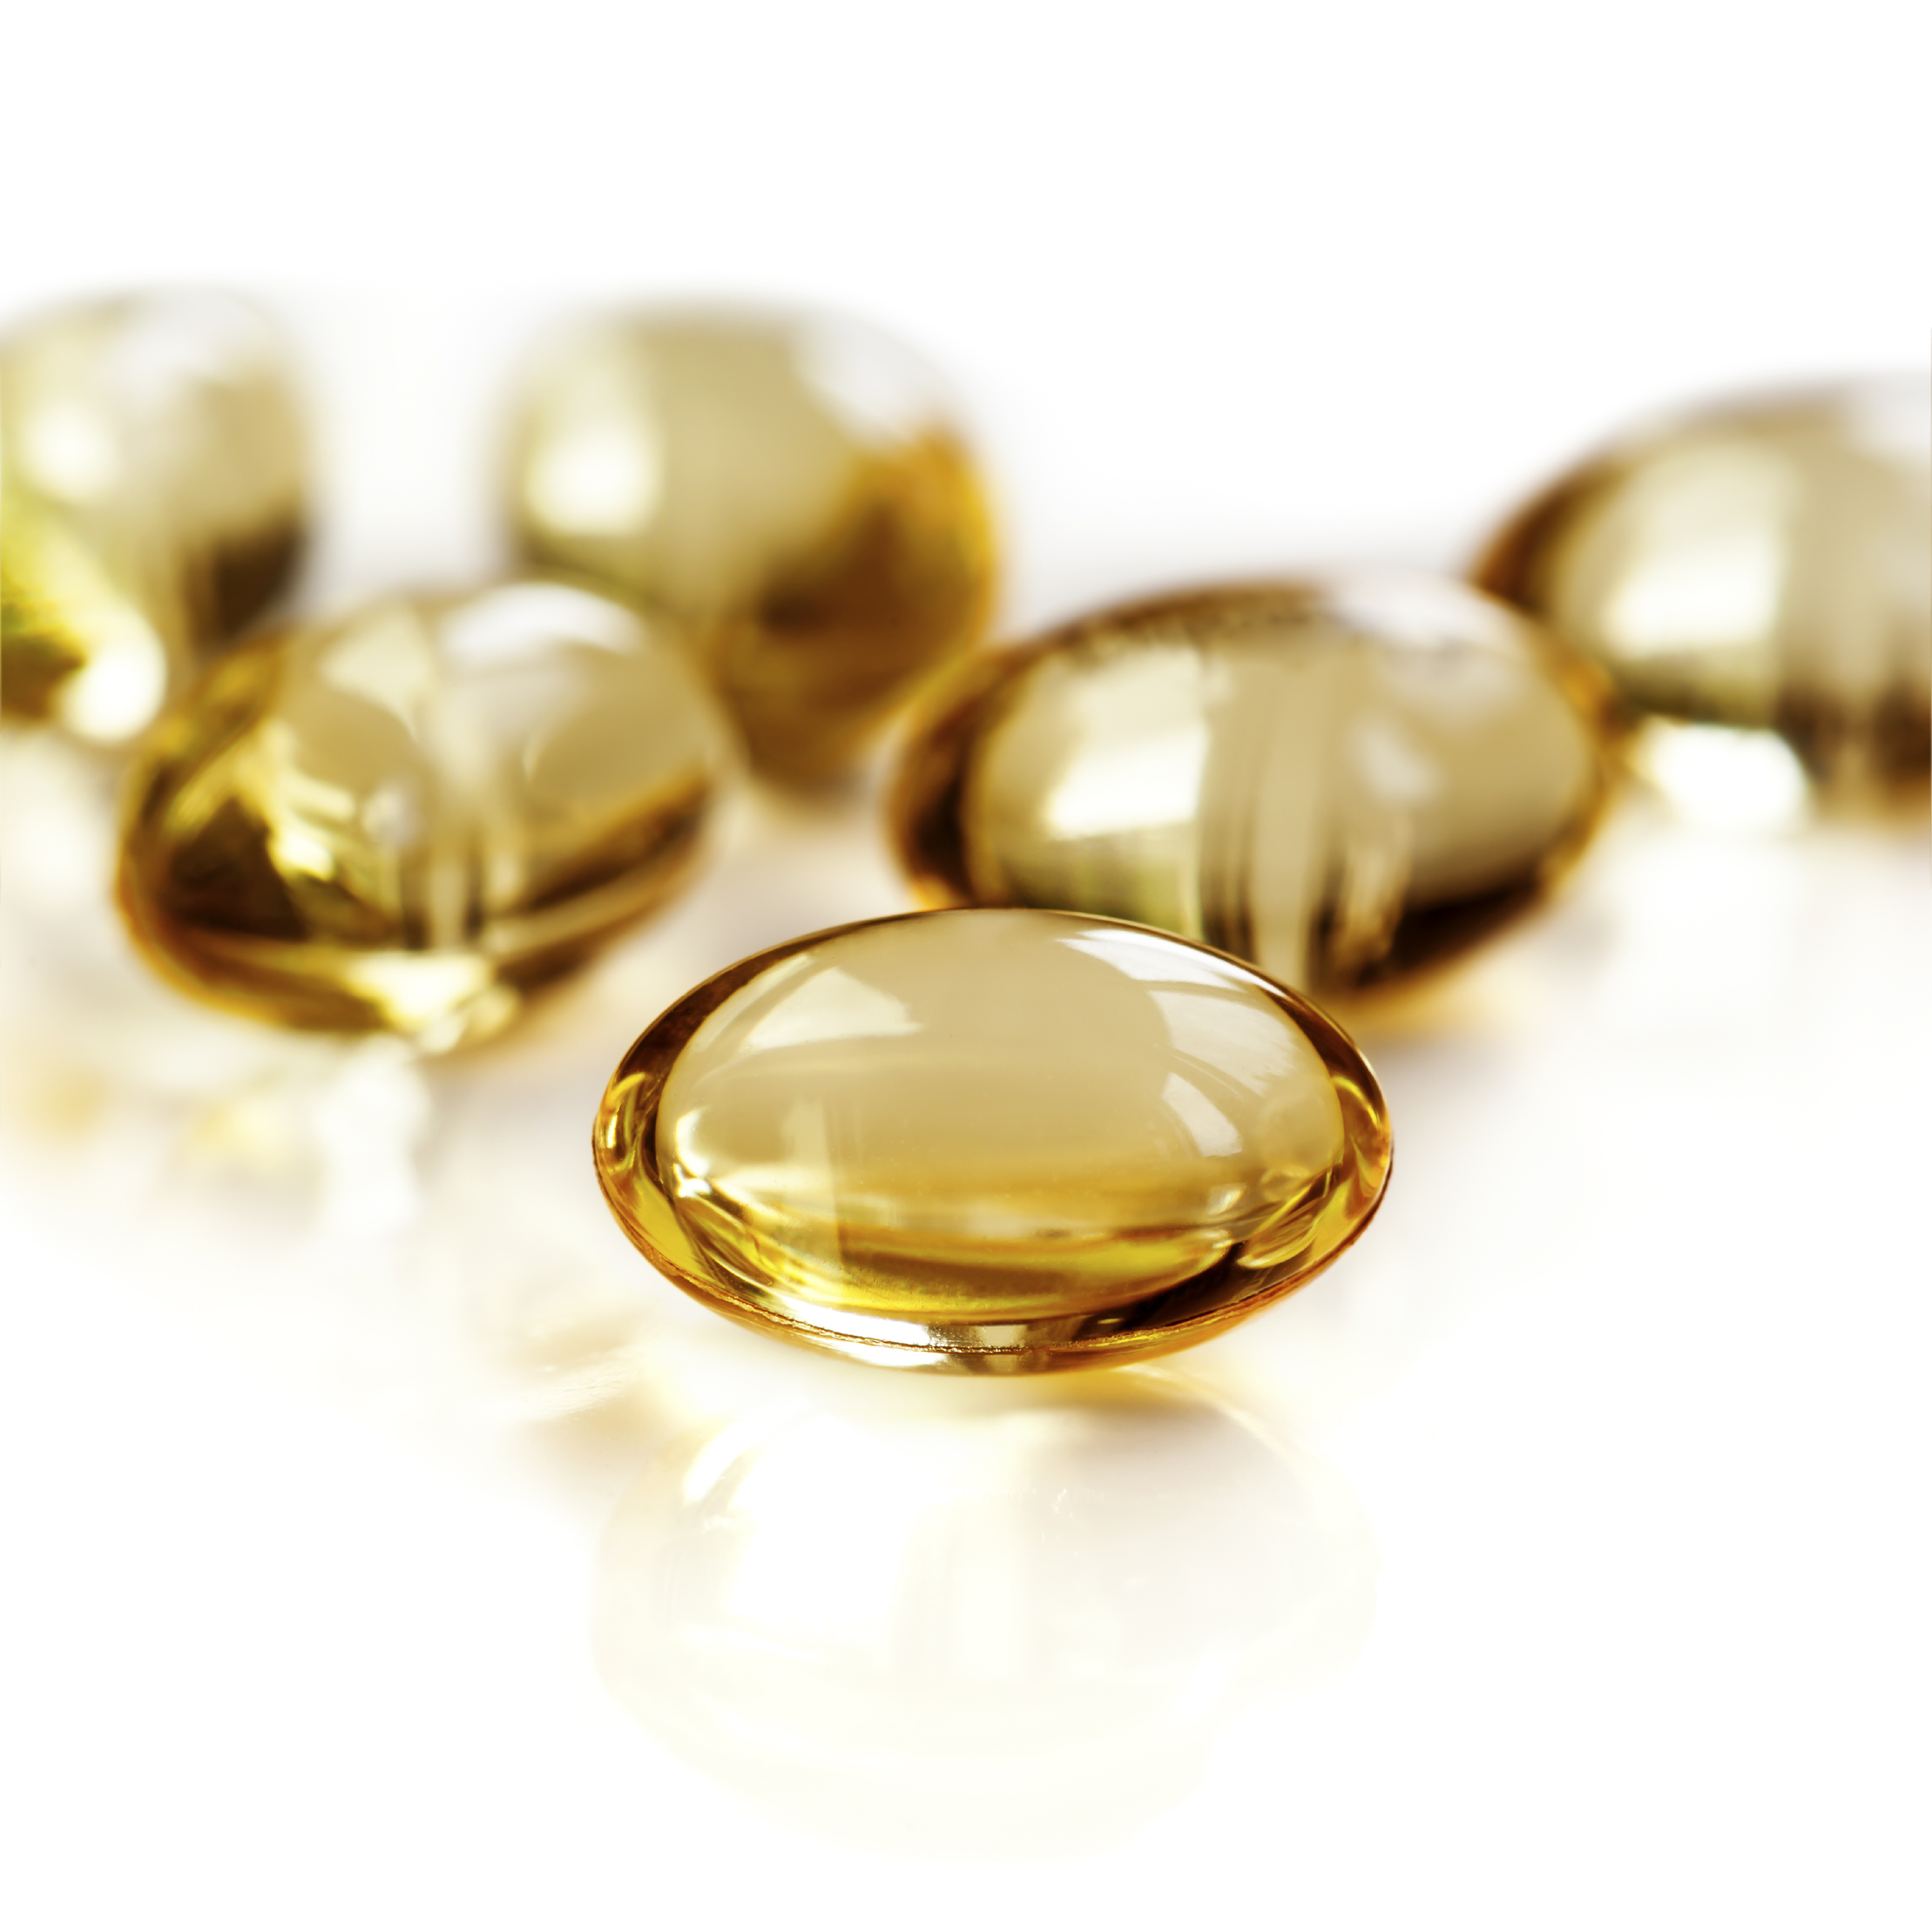 High doses of vitamin D may hurt seniors instead of help ...